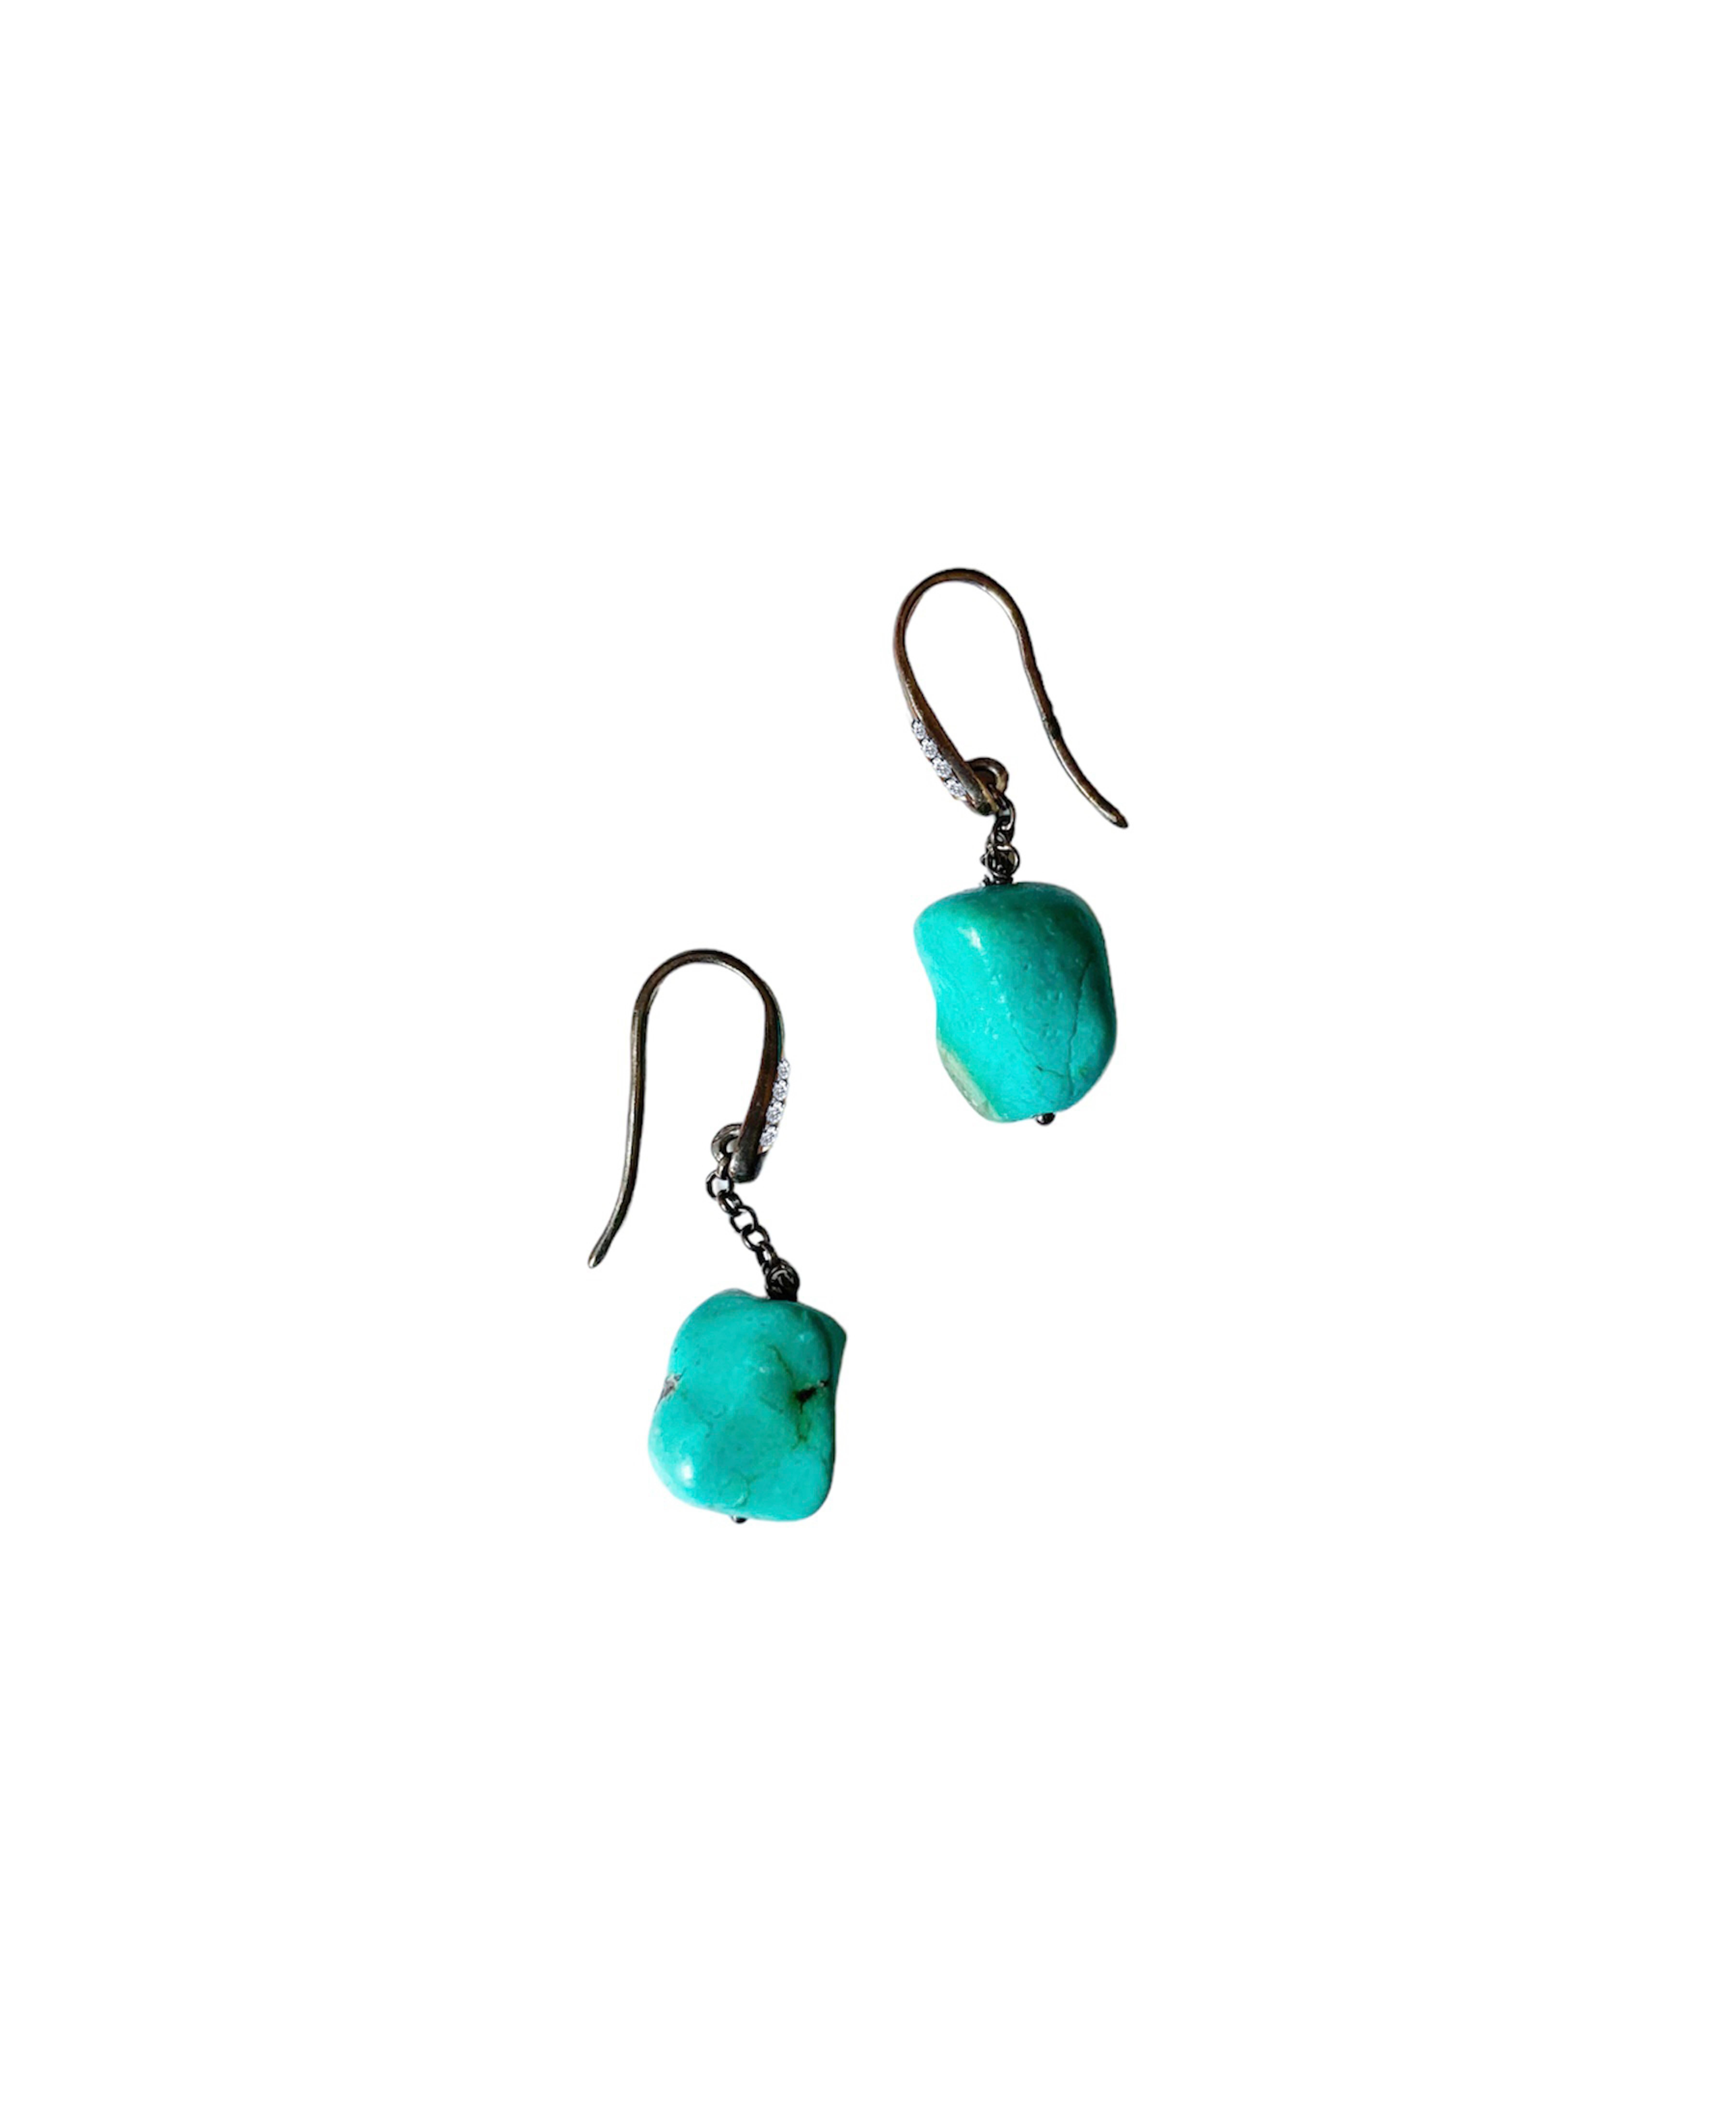 Artisan Bohemian Charm Handcrafted Turquoise and Gray Diamond Earrings For Sale